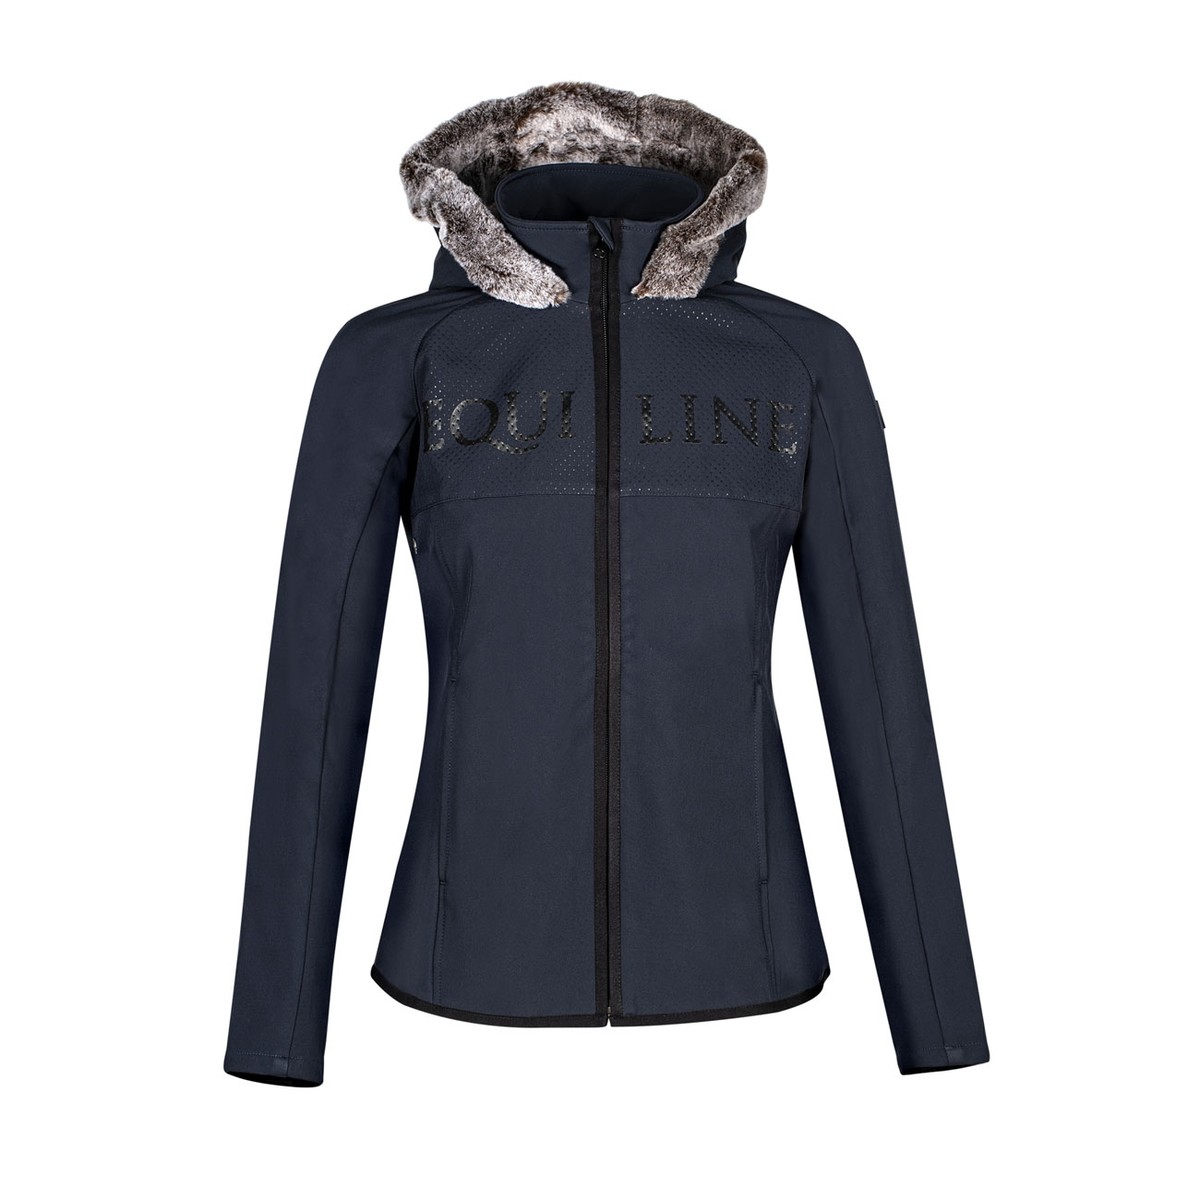 Blue Was £199.00 New Equiline Elly Ladies Softshell Jacket 